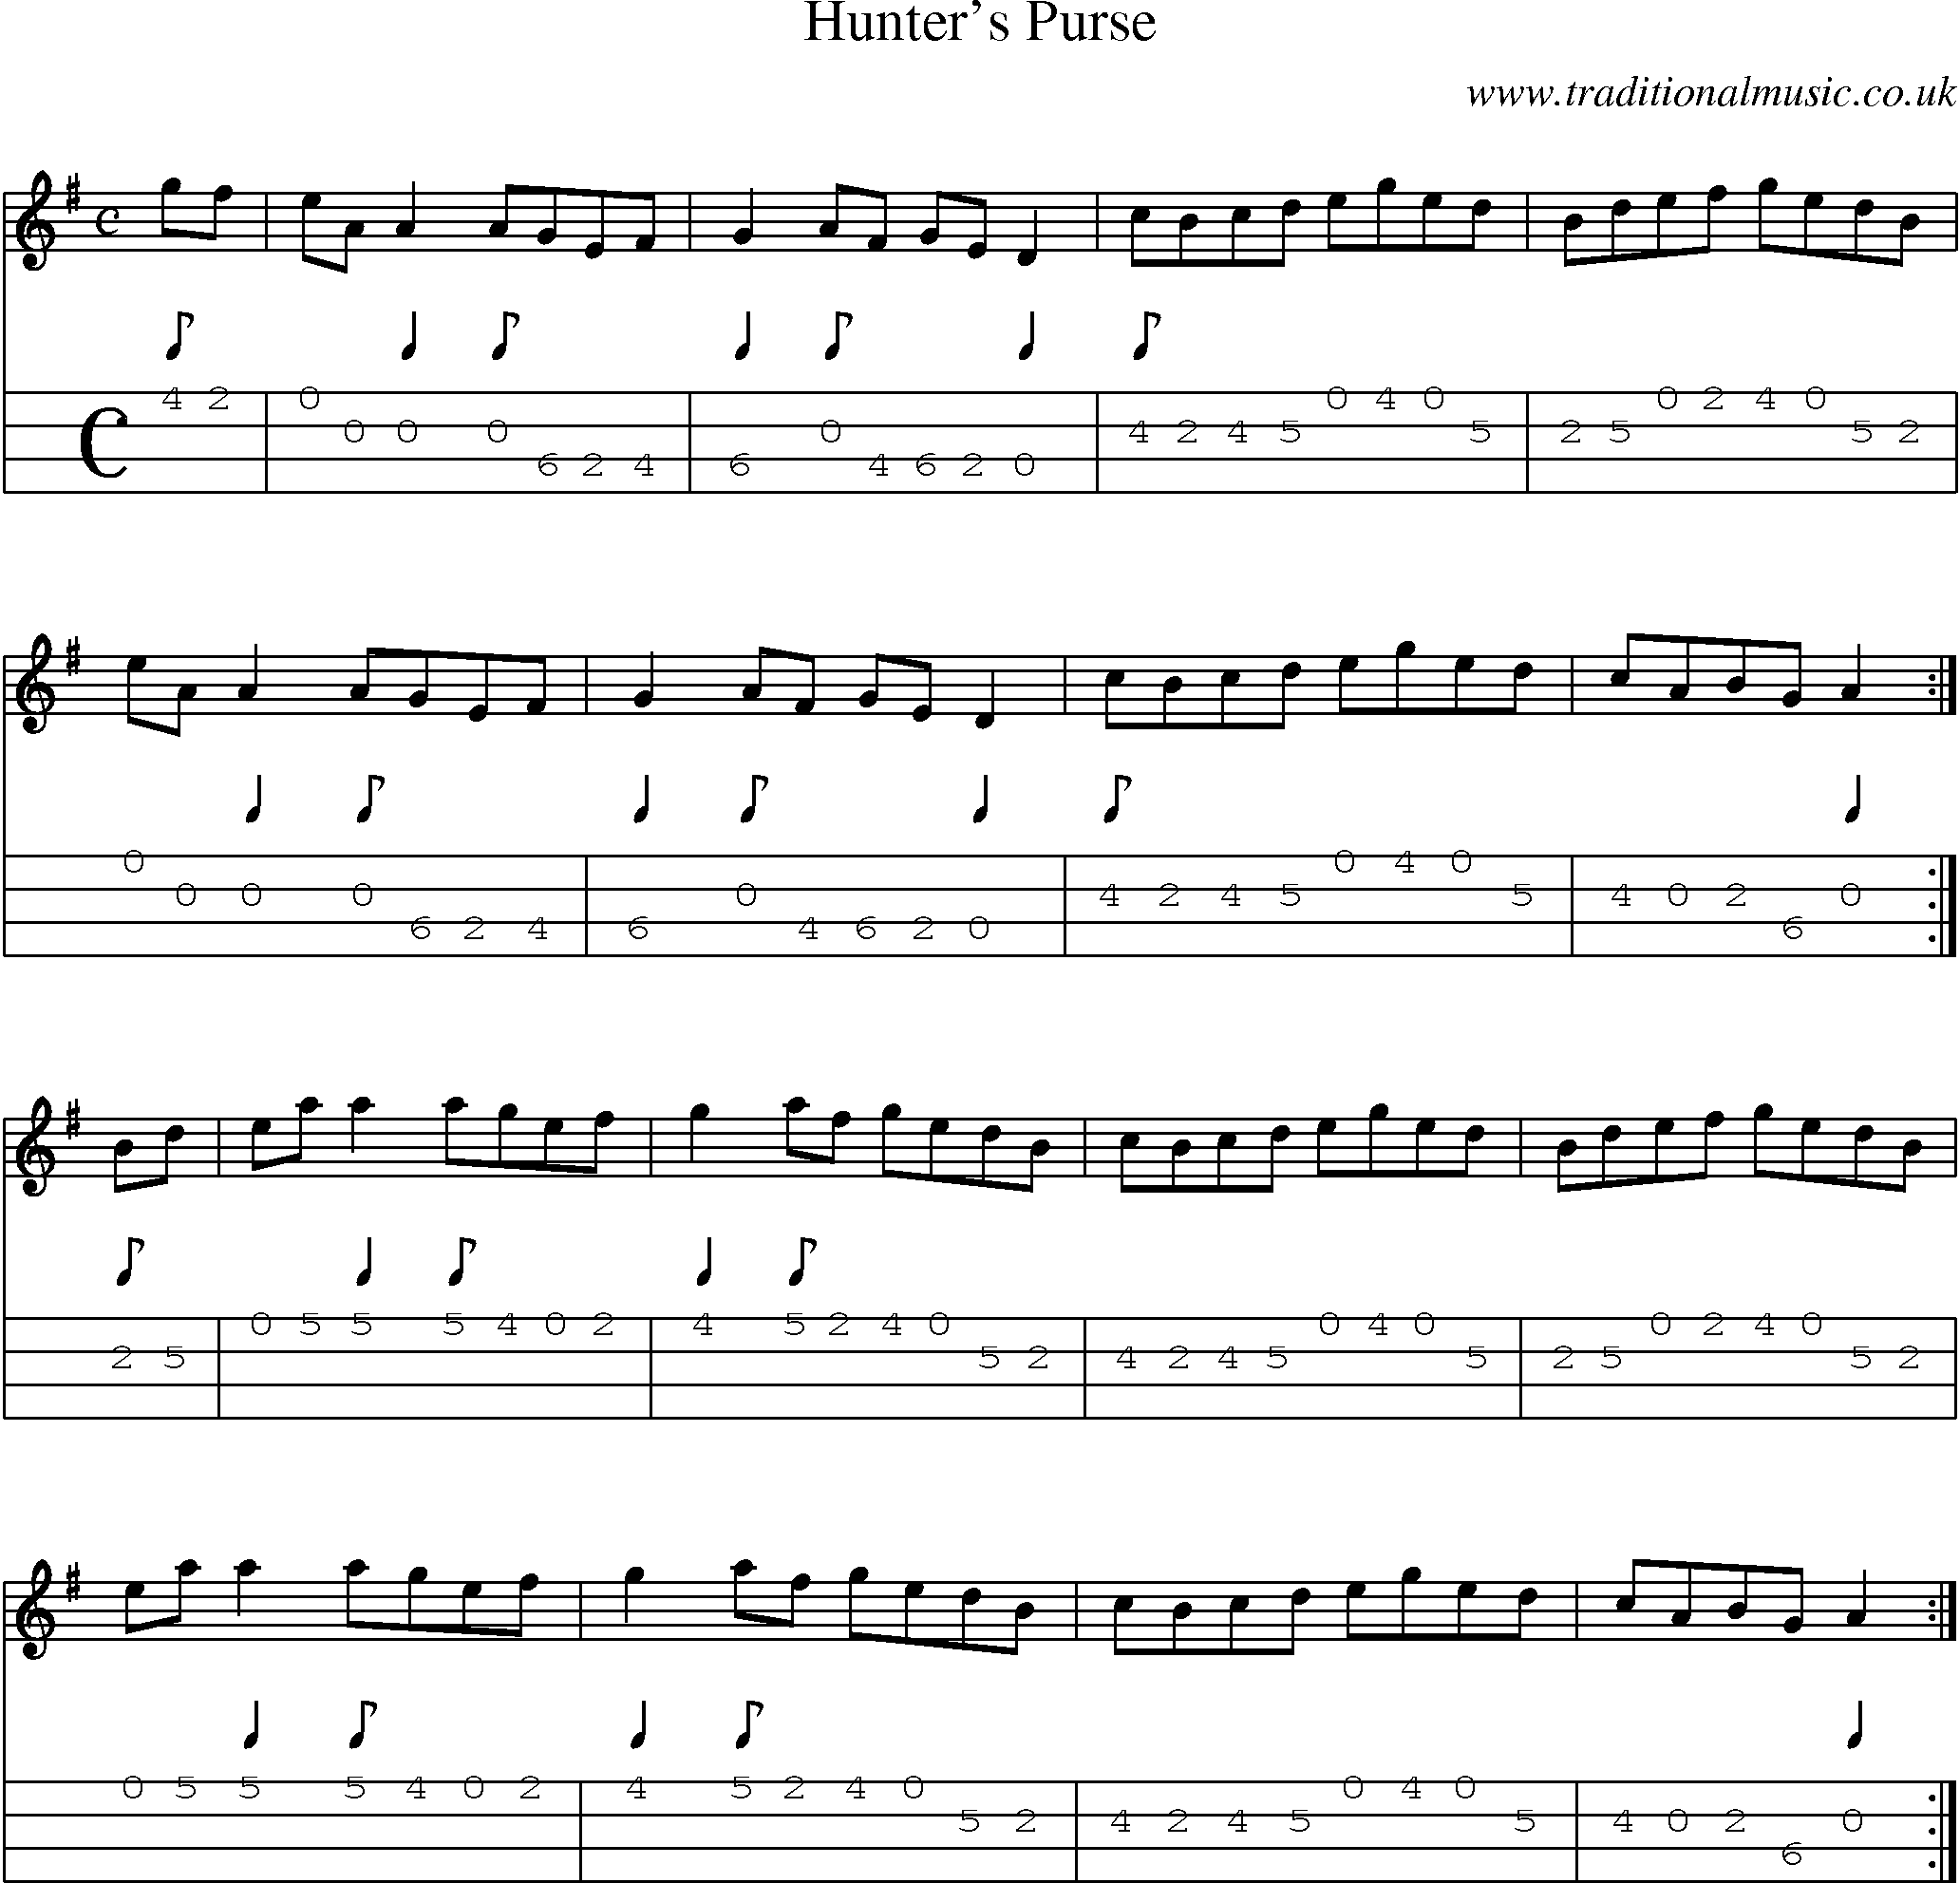 Music Score and Mandolin Tabs for Hunters Purse